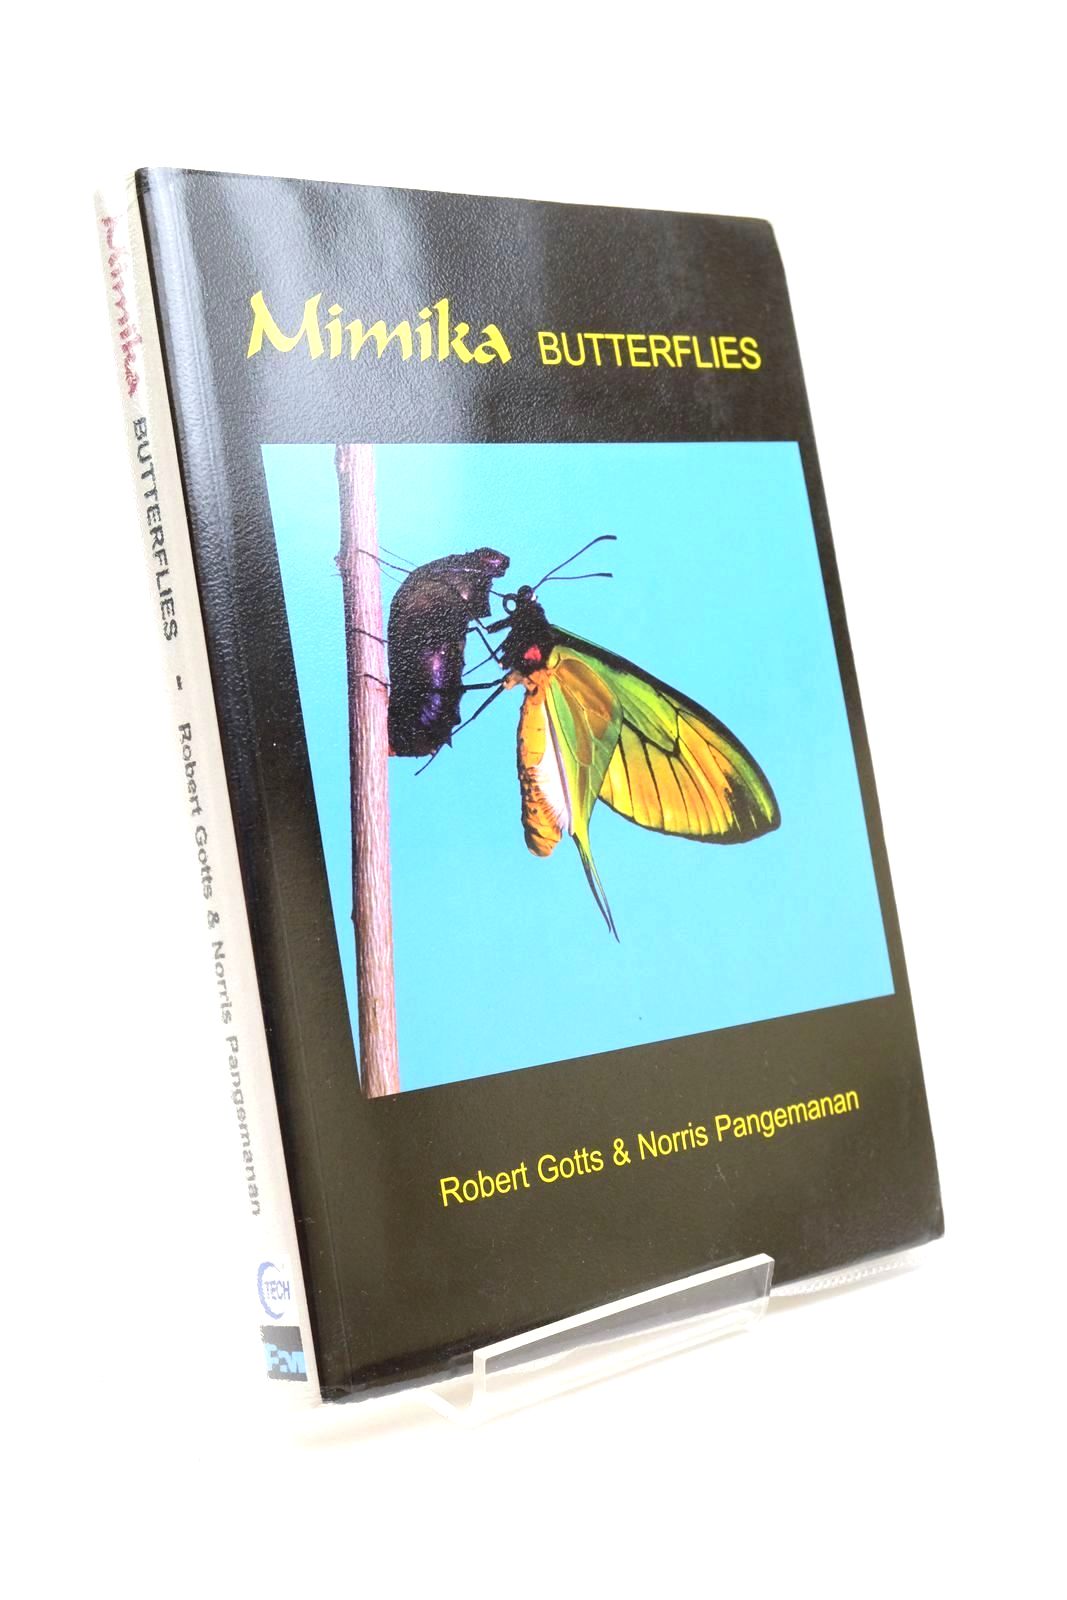 Photo of MIMIKA BUTTERFLIES written by Gotts, Robert Pangemanan, Norris published by Pt Freeport Indonesia (STOCK CODE: 1323032)  for sale by Stella & Rose's Books